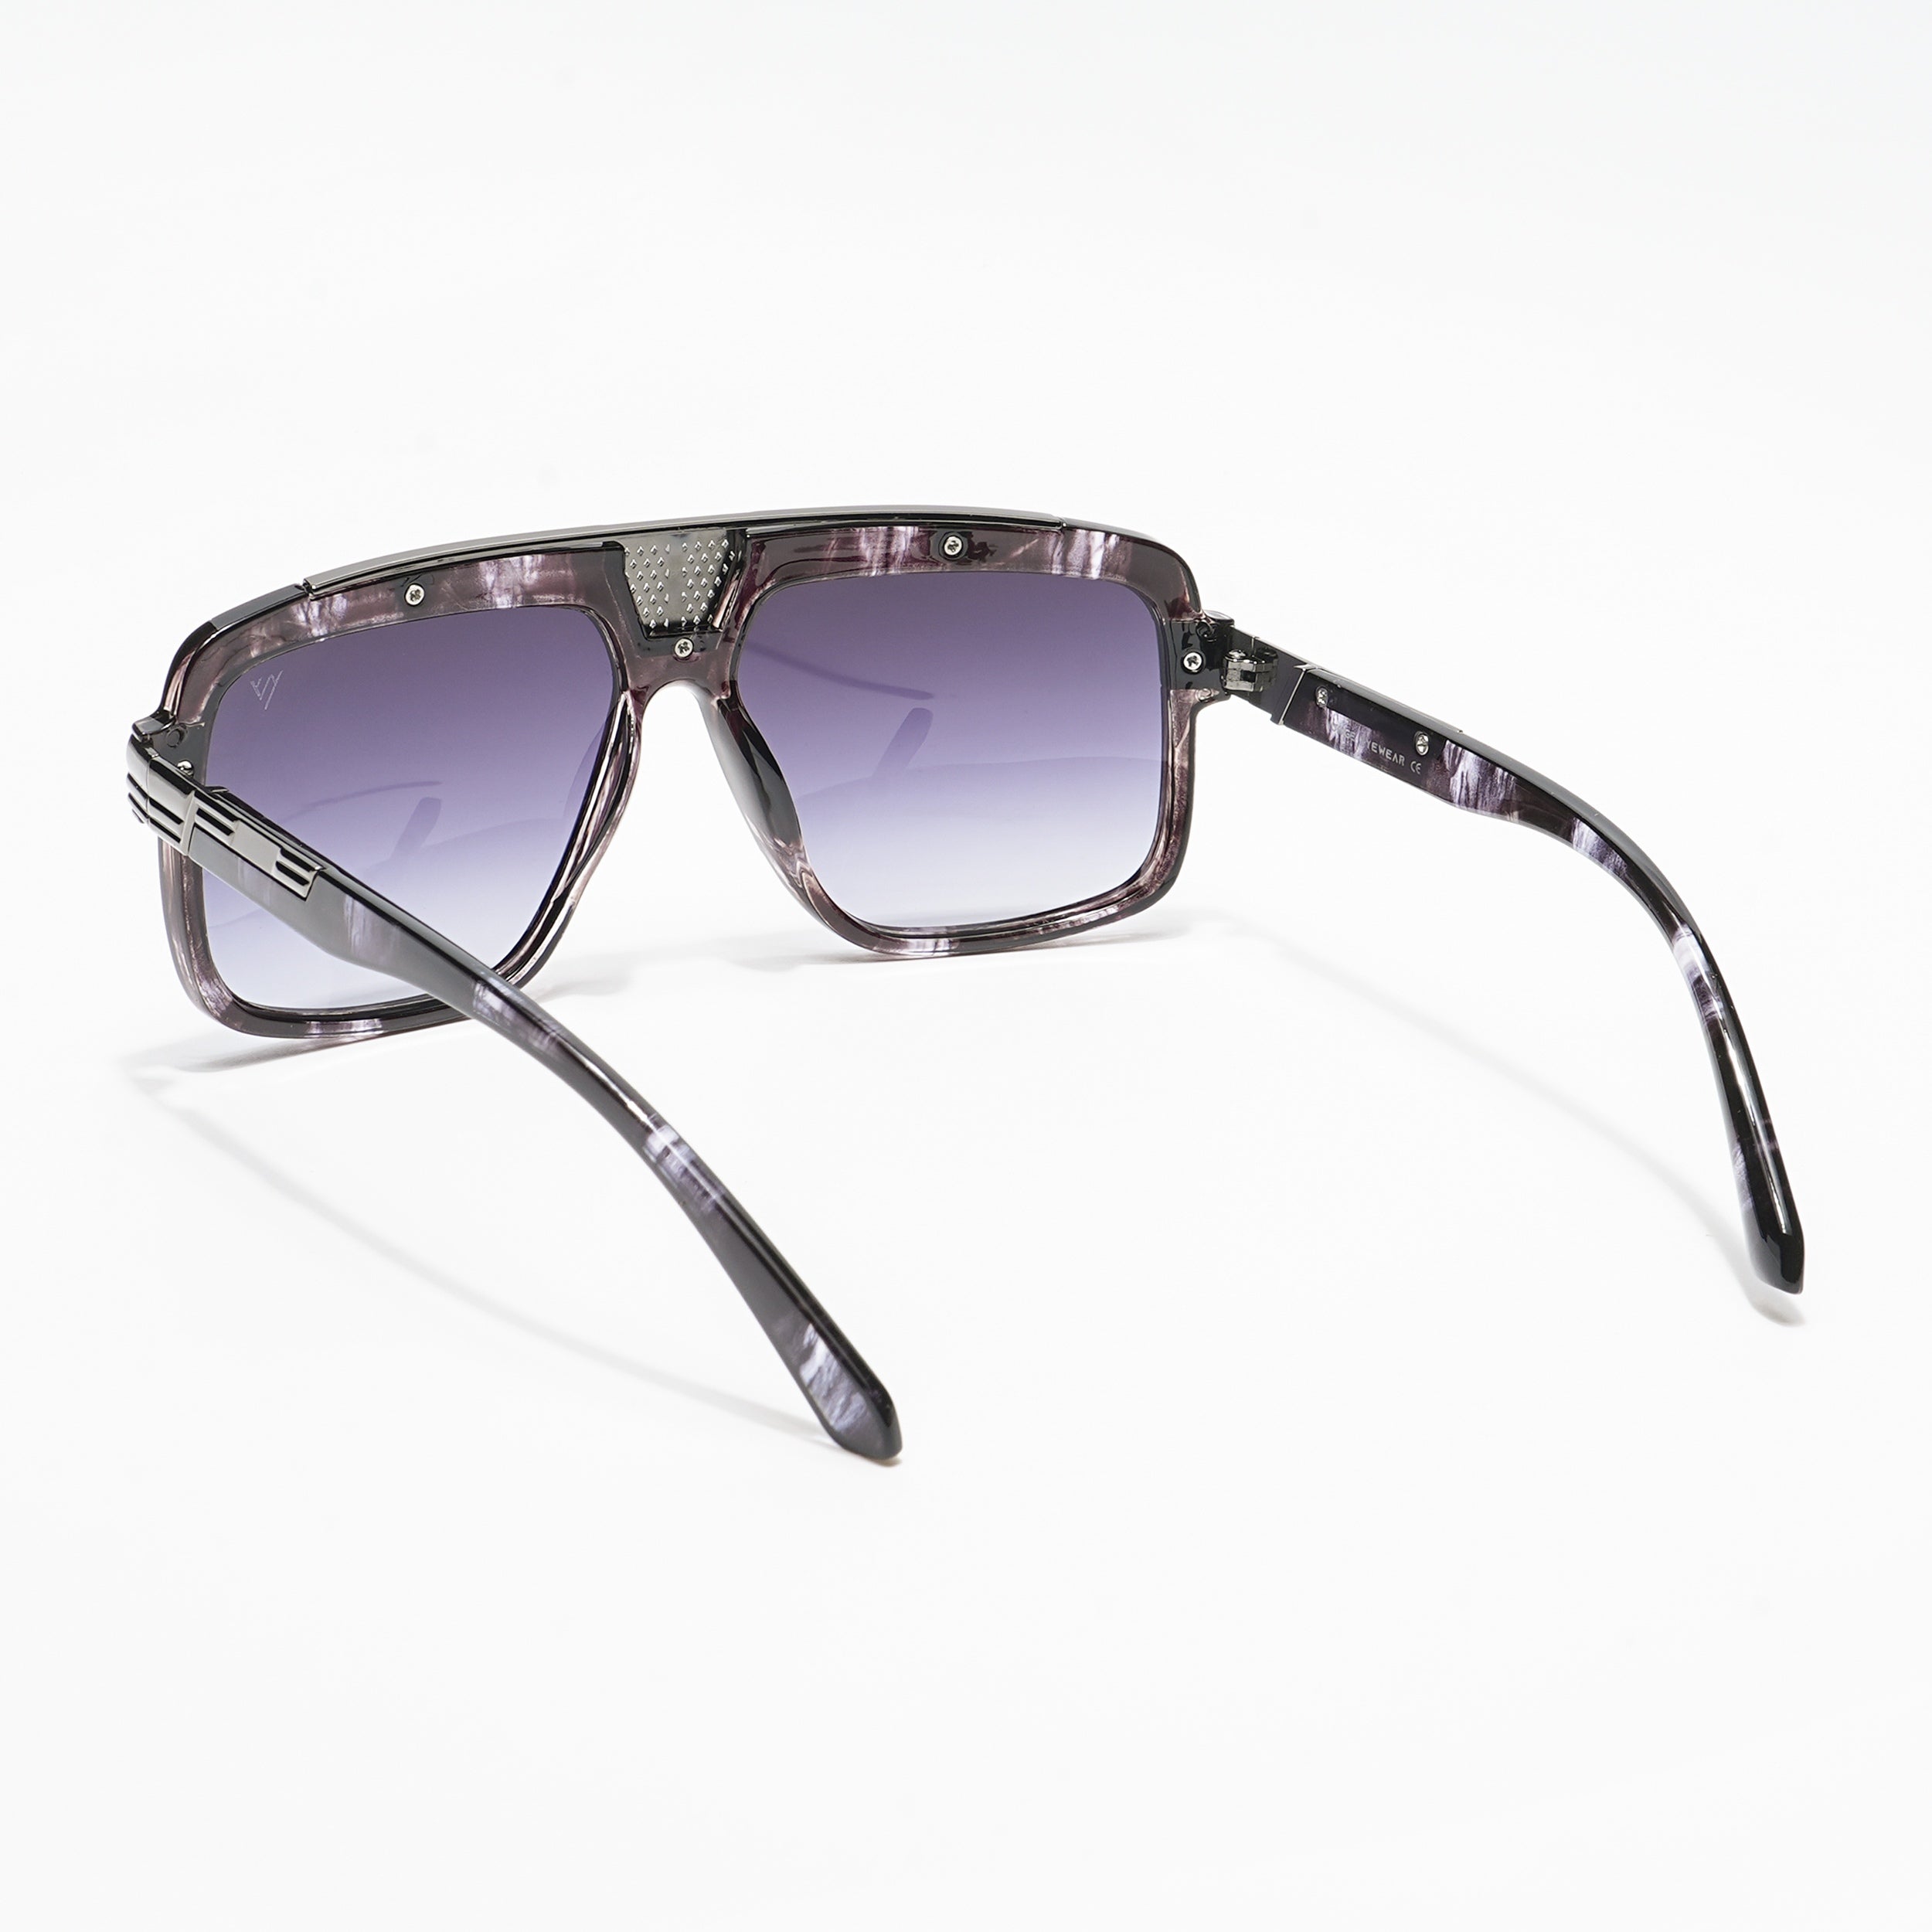 Voyage Grey Over Size Sunglasses for Women - MG4764